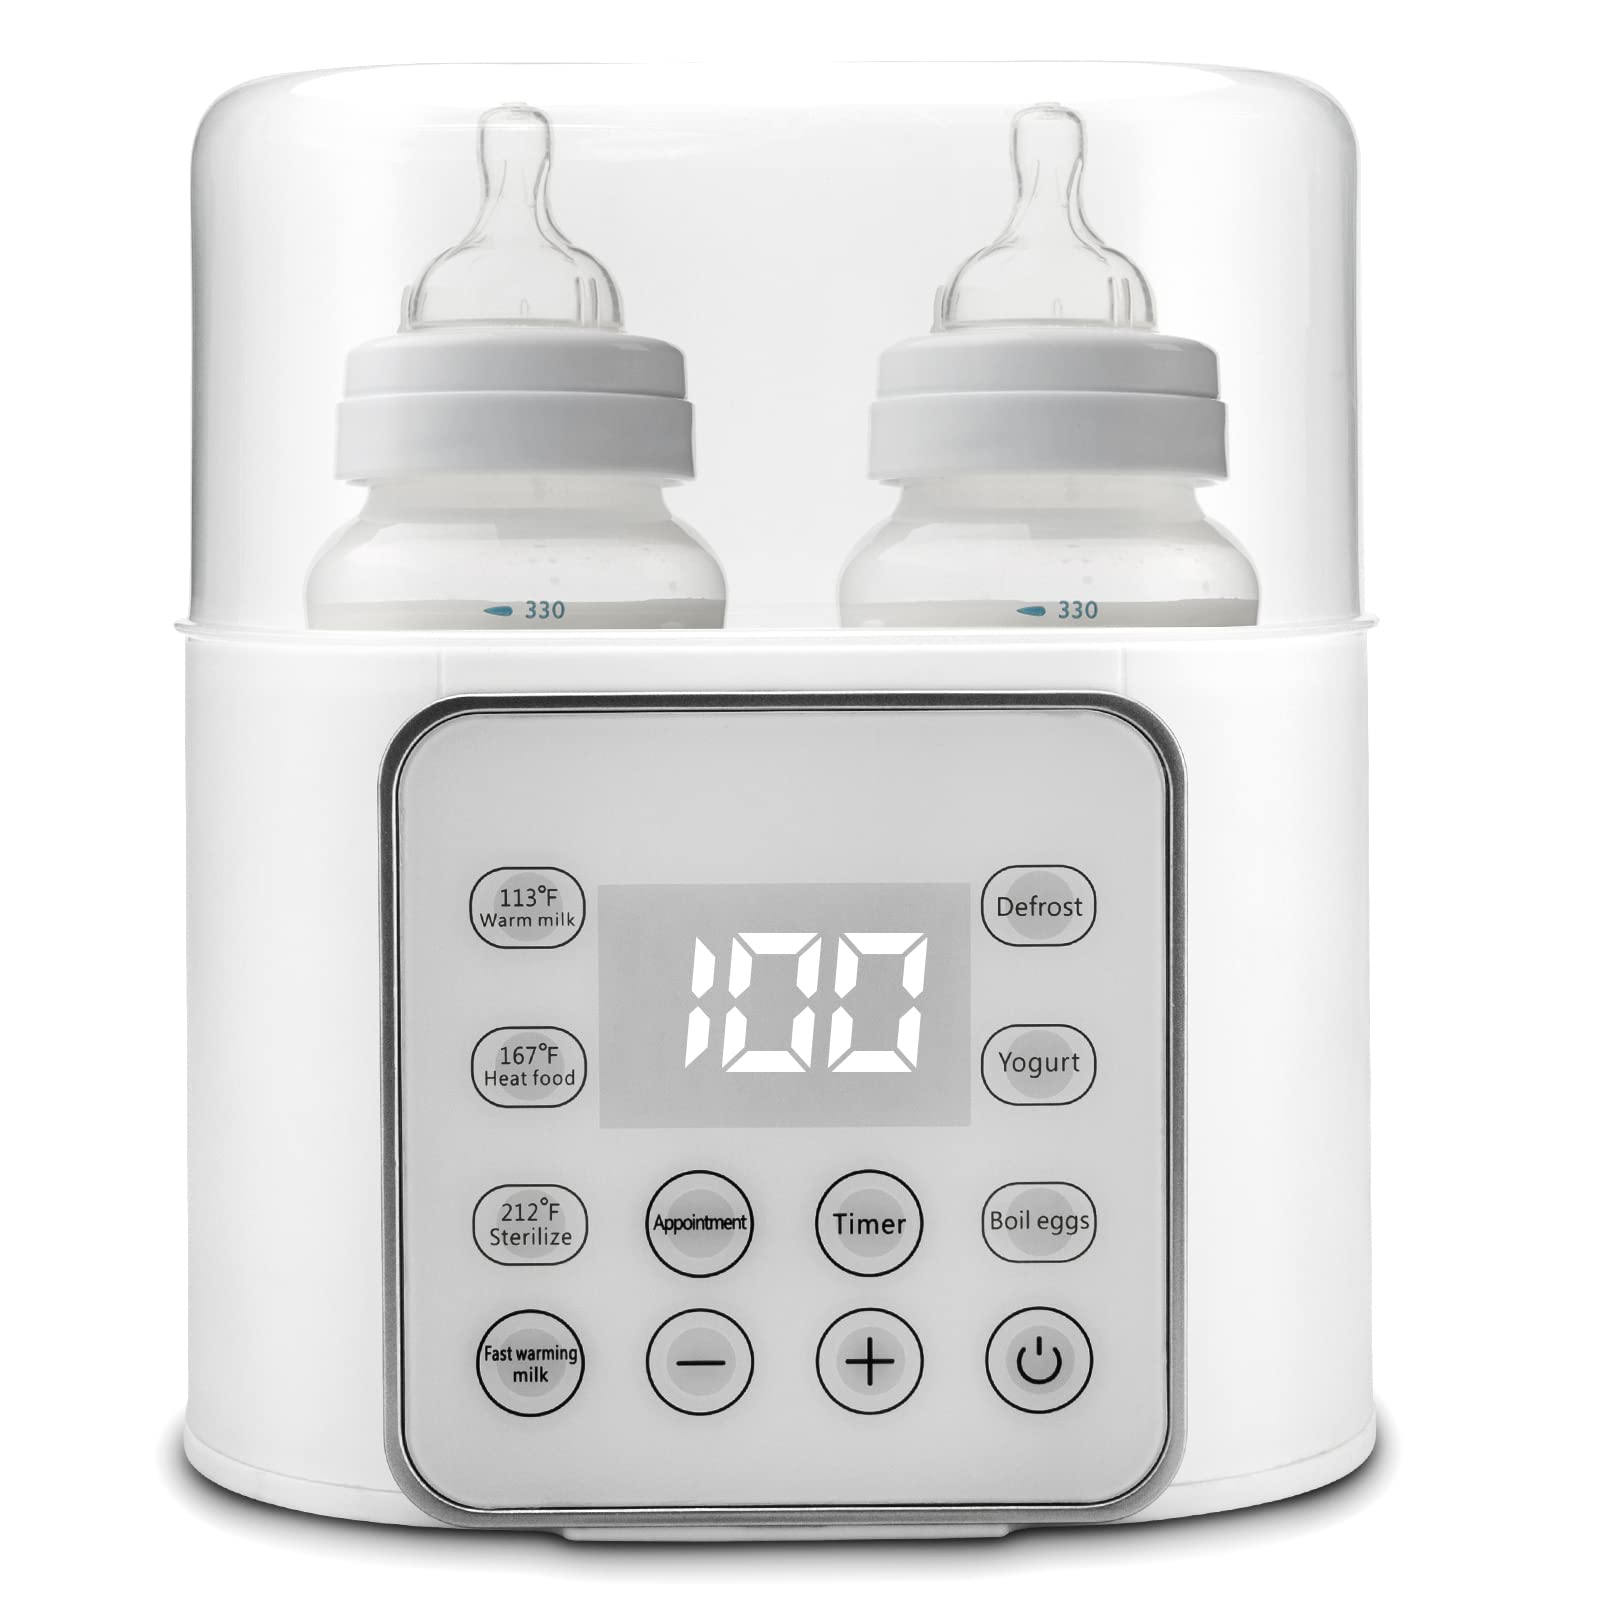 Winged Whale Baby Bottle Warmer 9-in-1 Multifuntion Breast Milk Warmer, Fast Baby Food Heater & Defrost Warmer with Timer for Twins, 